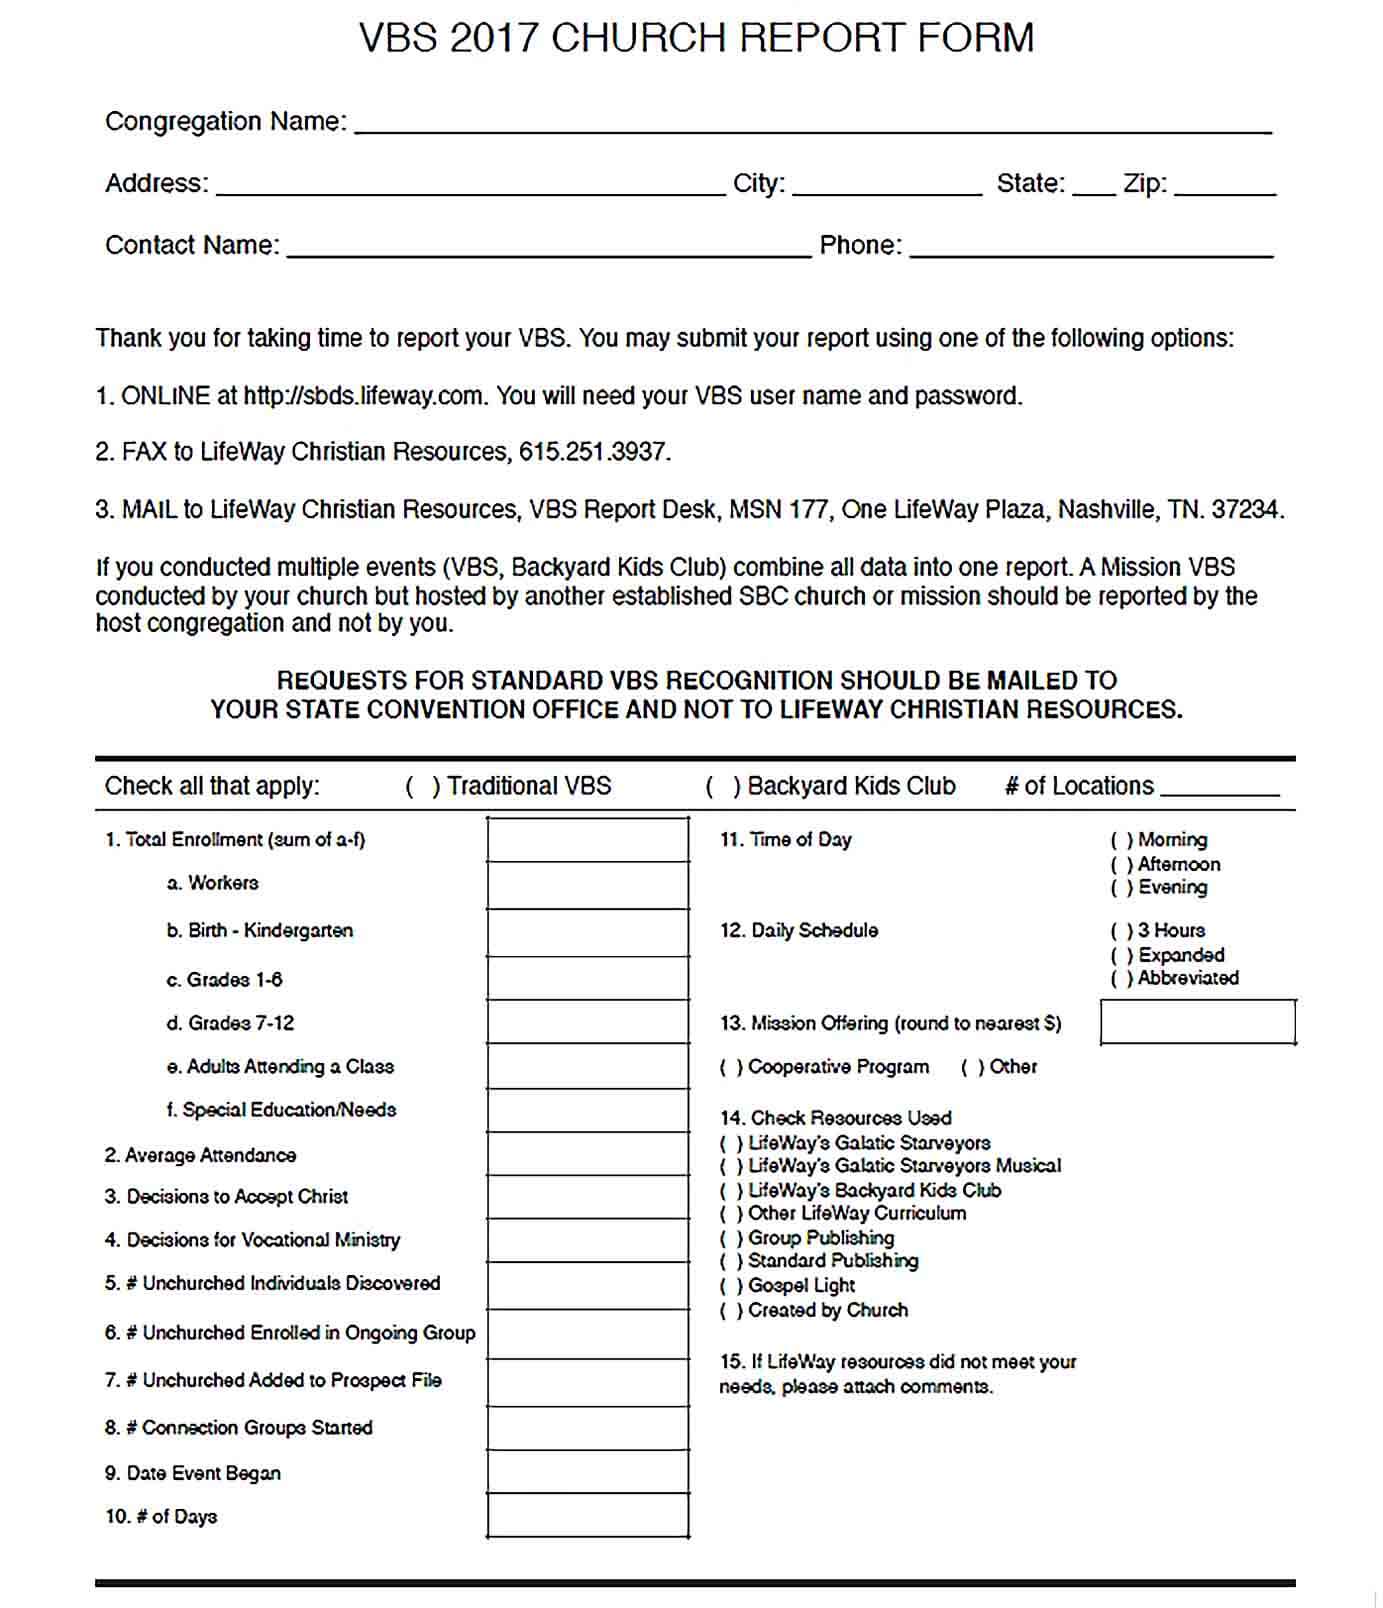 Sample 8. VBS 2017 CHURCH REPORT FORM FOR ADMIN3